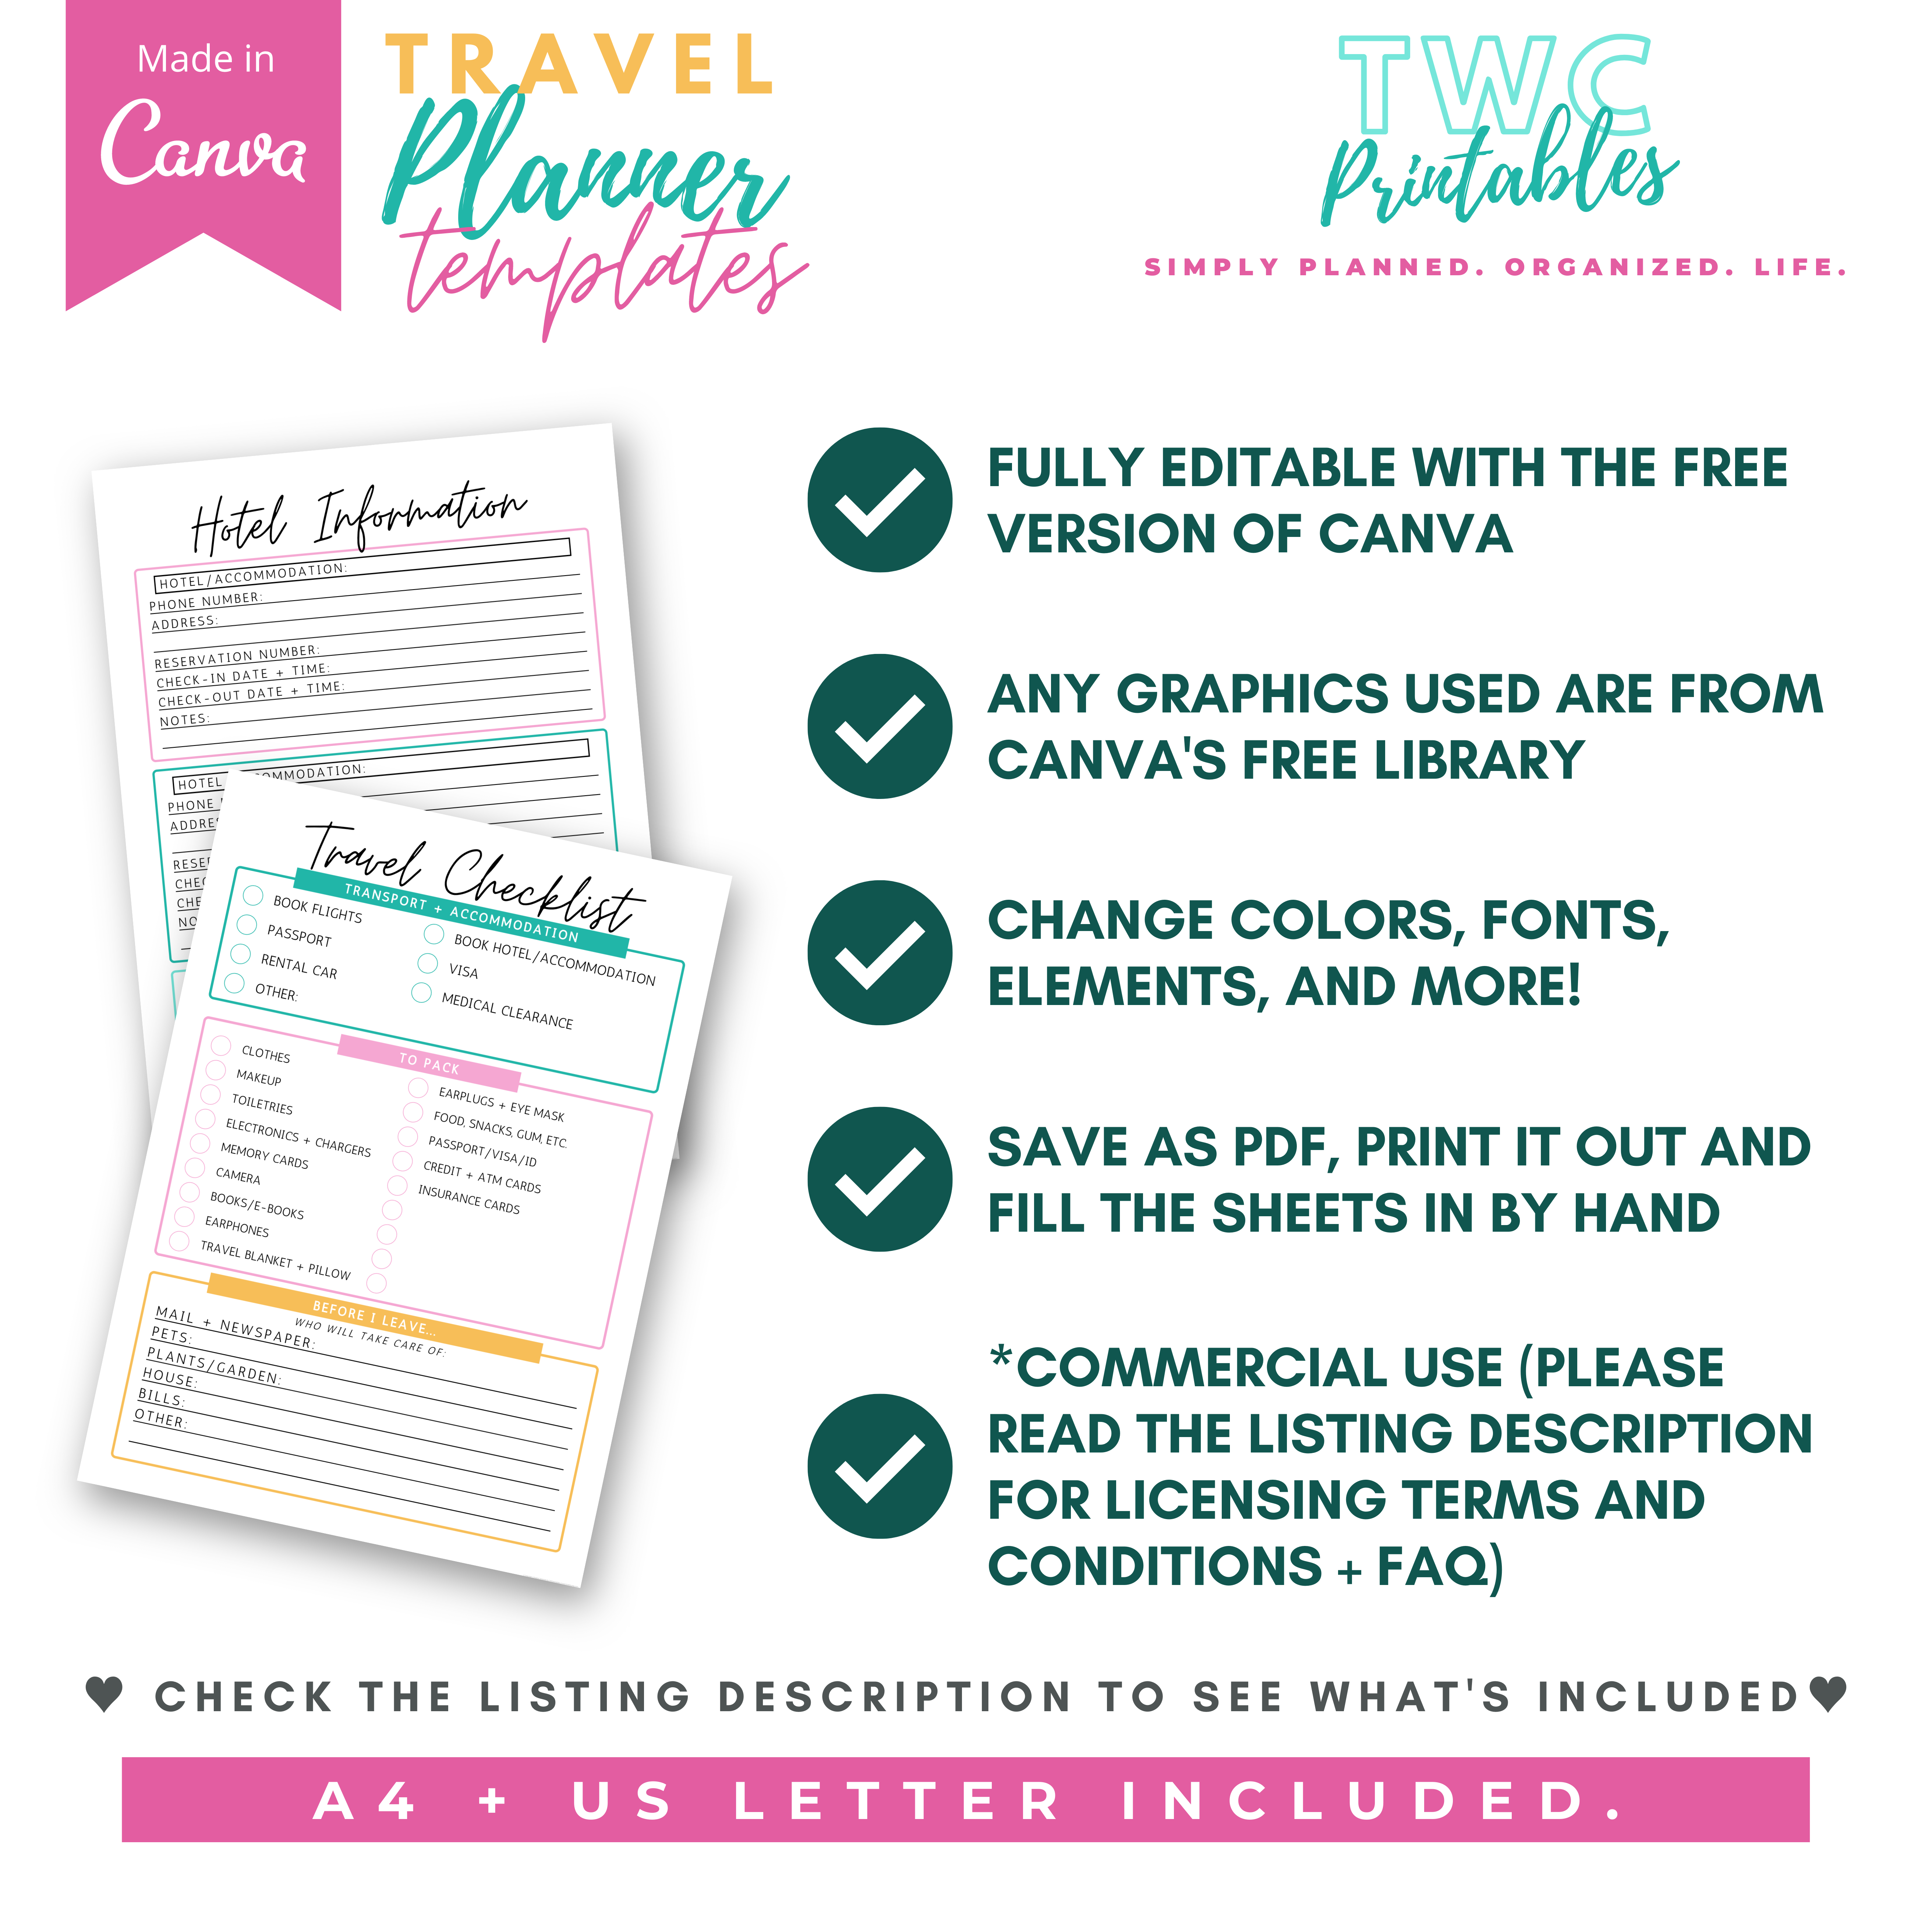 Plan your next epic trip with this editable travel planner template for Canva! Creating planner sheets from scratch takes so much time, and possibly money. These editable planner sheets will make it easier to create the sheets you really need to plan out your trips, budget, checklists and more. Edit these templates with the free version of Canva!